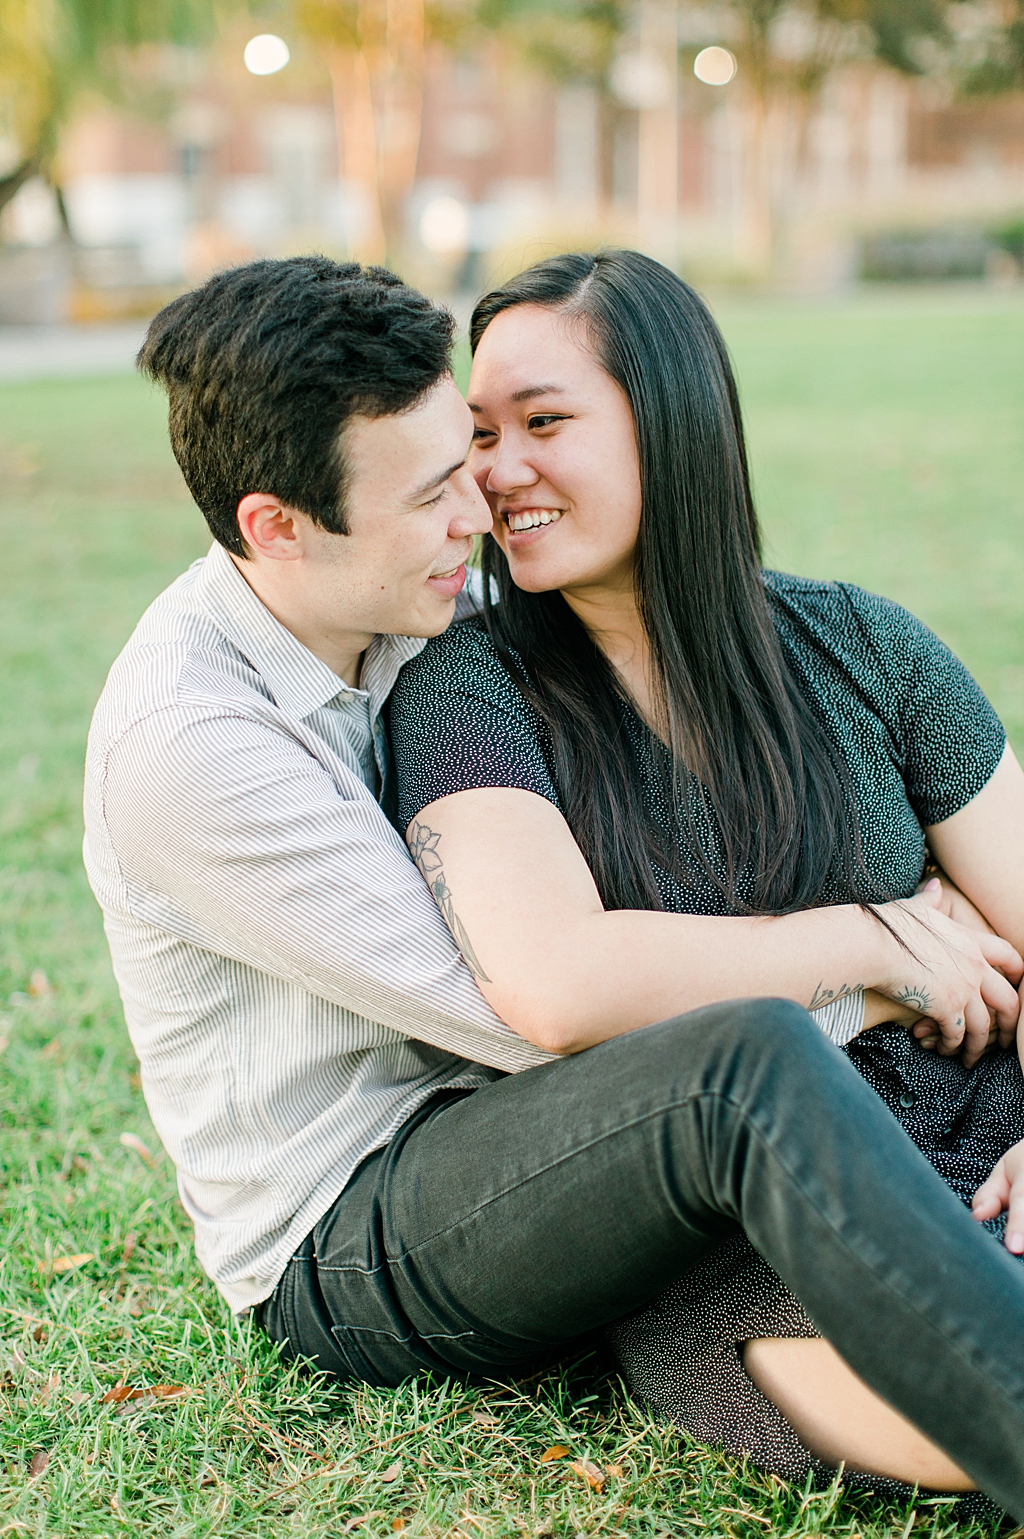 Becky_Collin_Navy_Yards_Park_The_Wharf_Washington_DC_Fall_Engagement_Session_AngelikaJohnsPhotography-7923.jpg